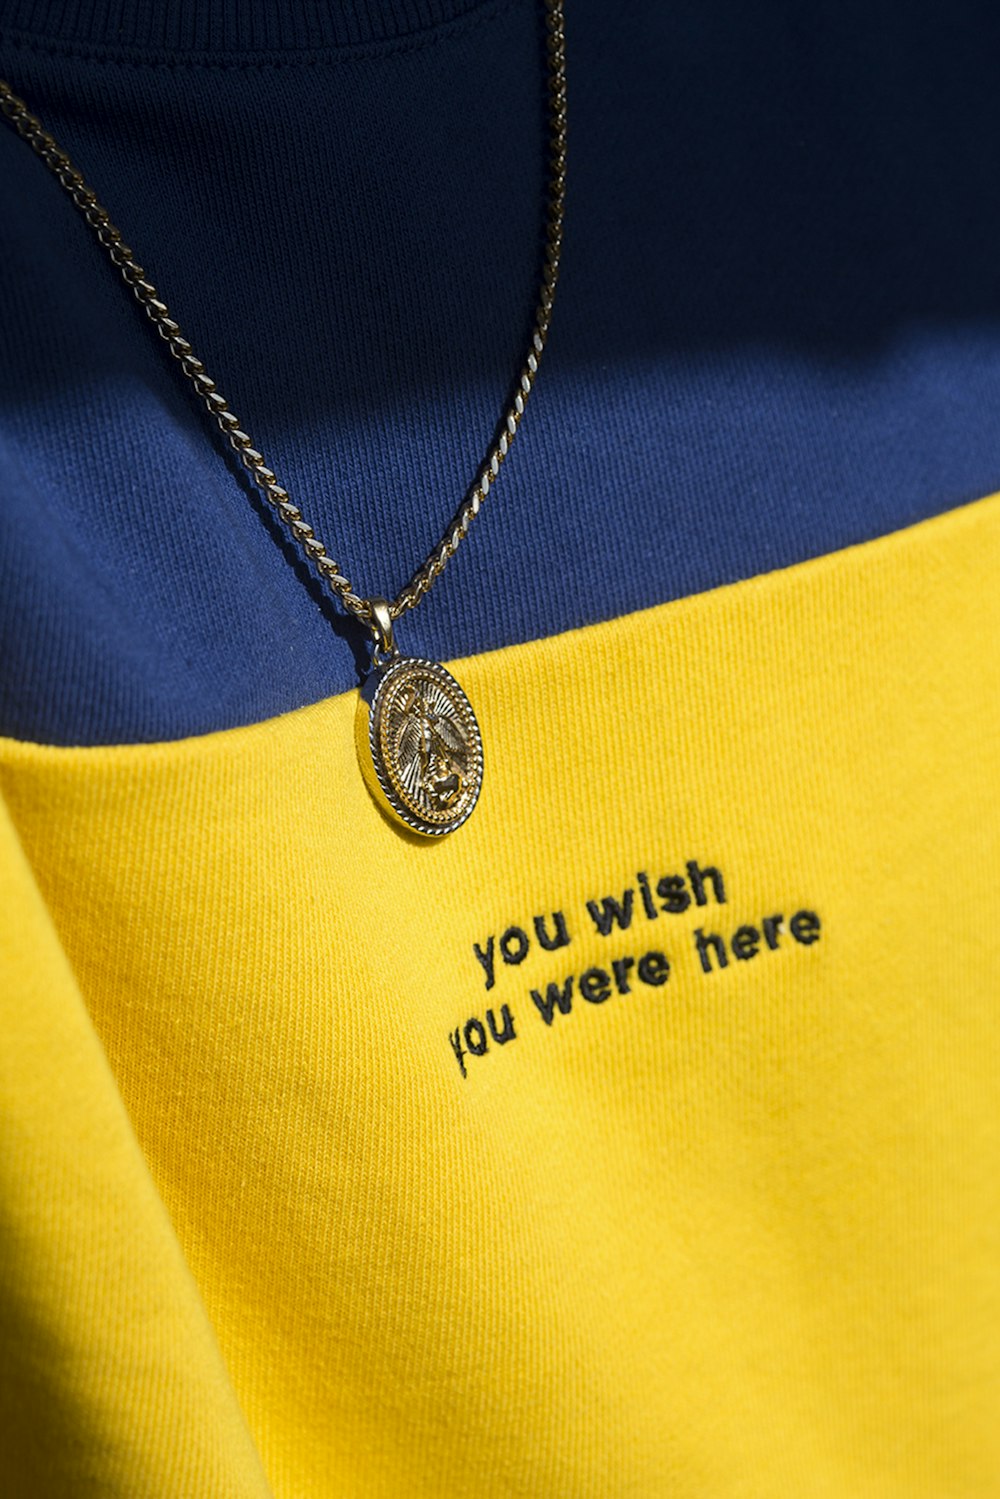 silver round pendant necklace on yellow textile